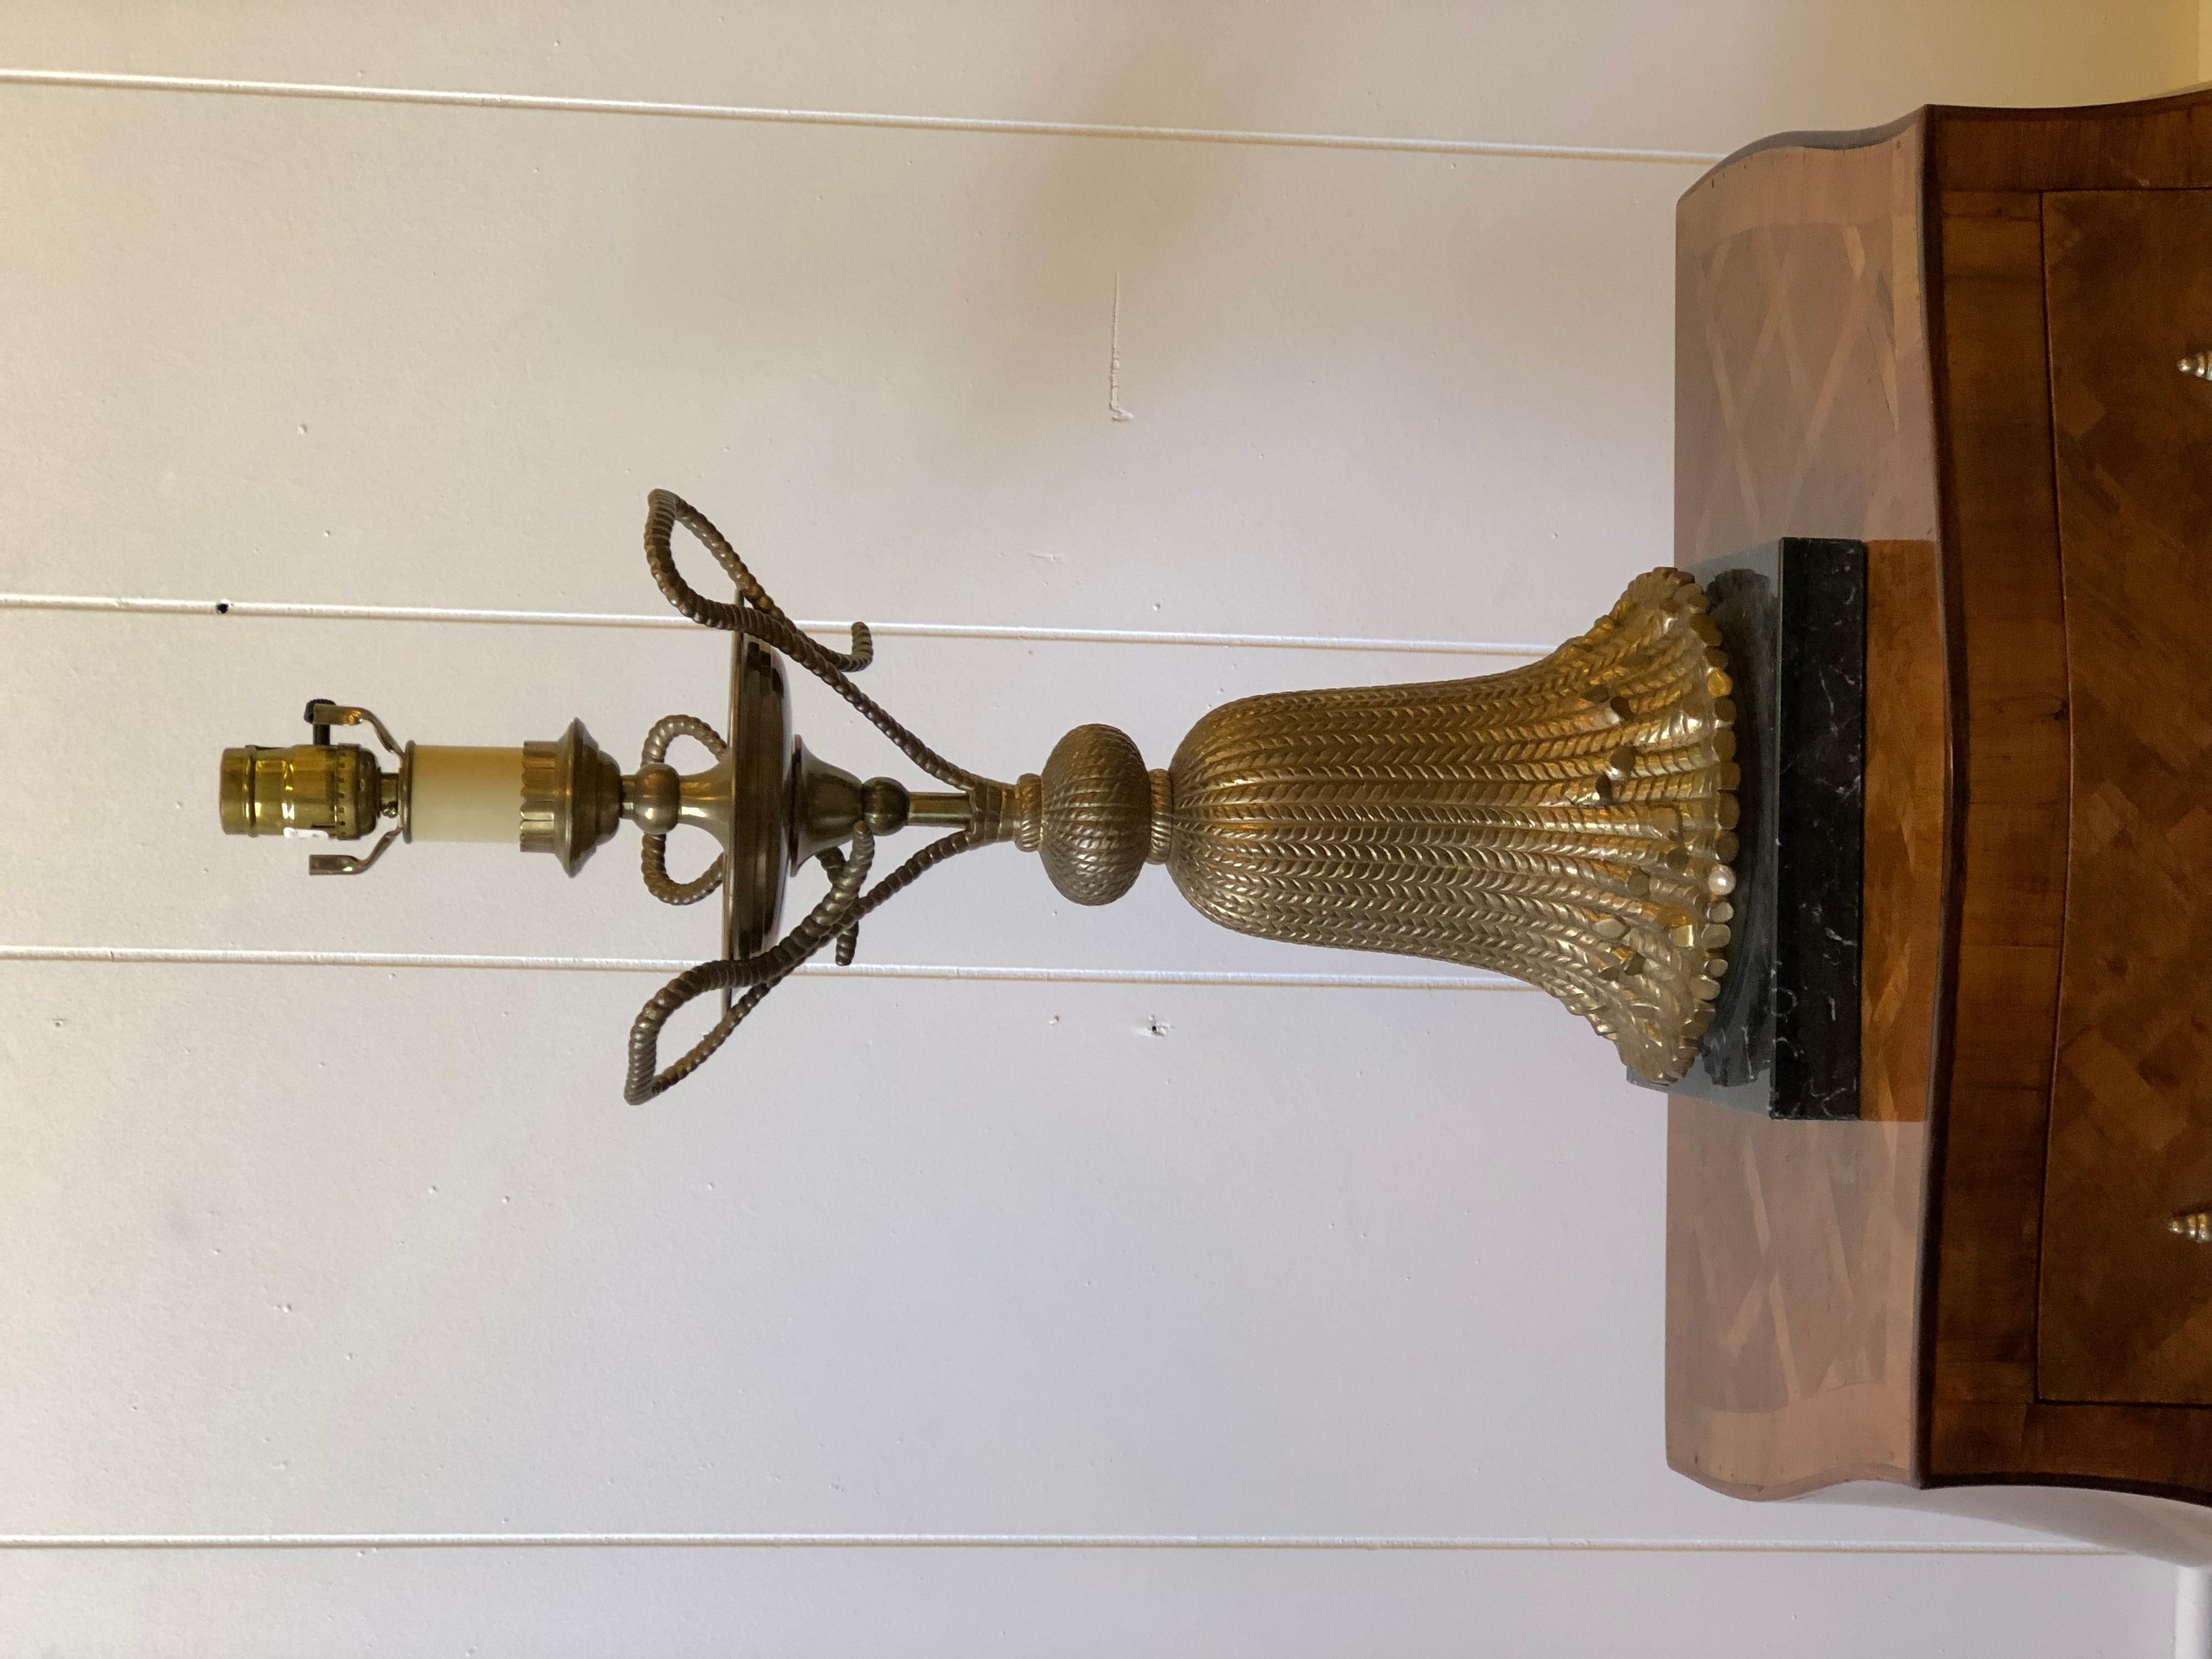 Late 20th century table lamp made of cast brass rope and tassels, and mounted on a black marble platform base. Made by Chapman in the Hollywood Regency style.